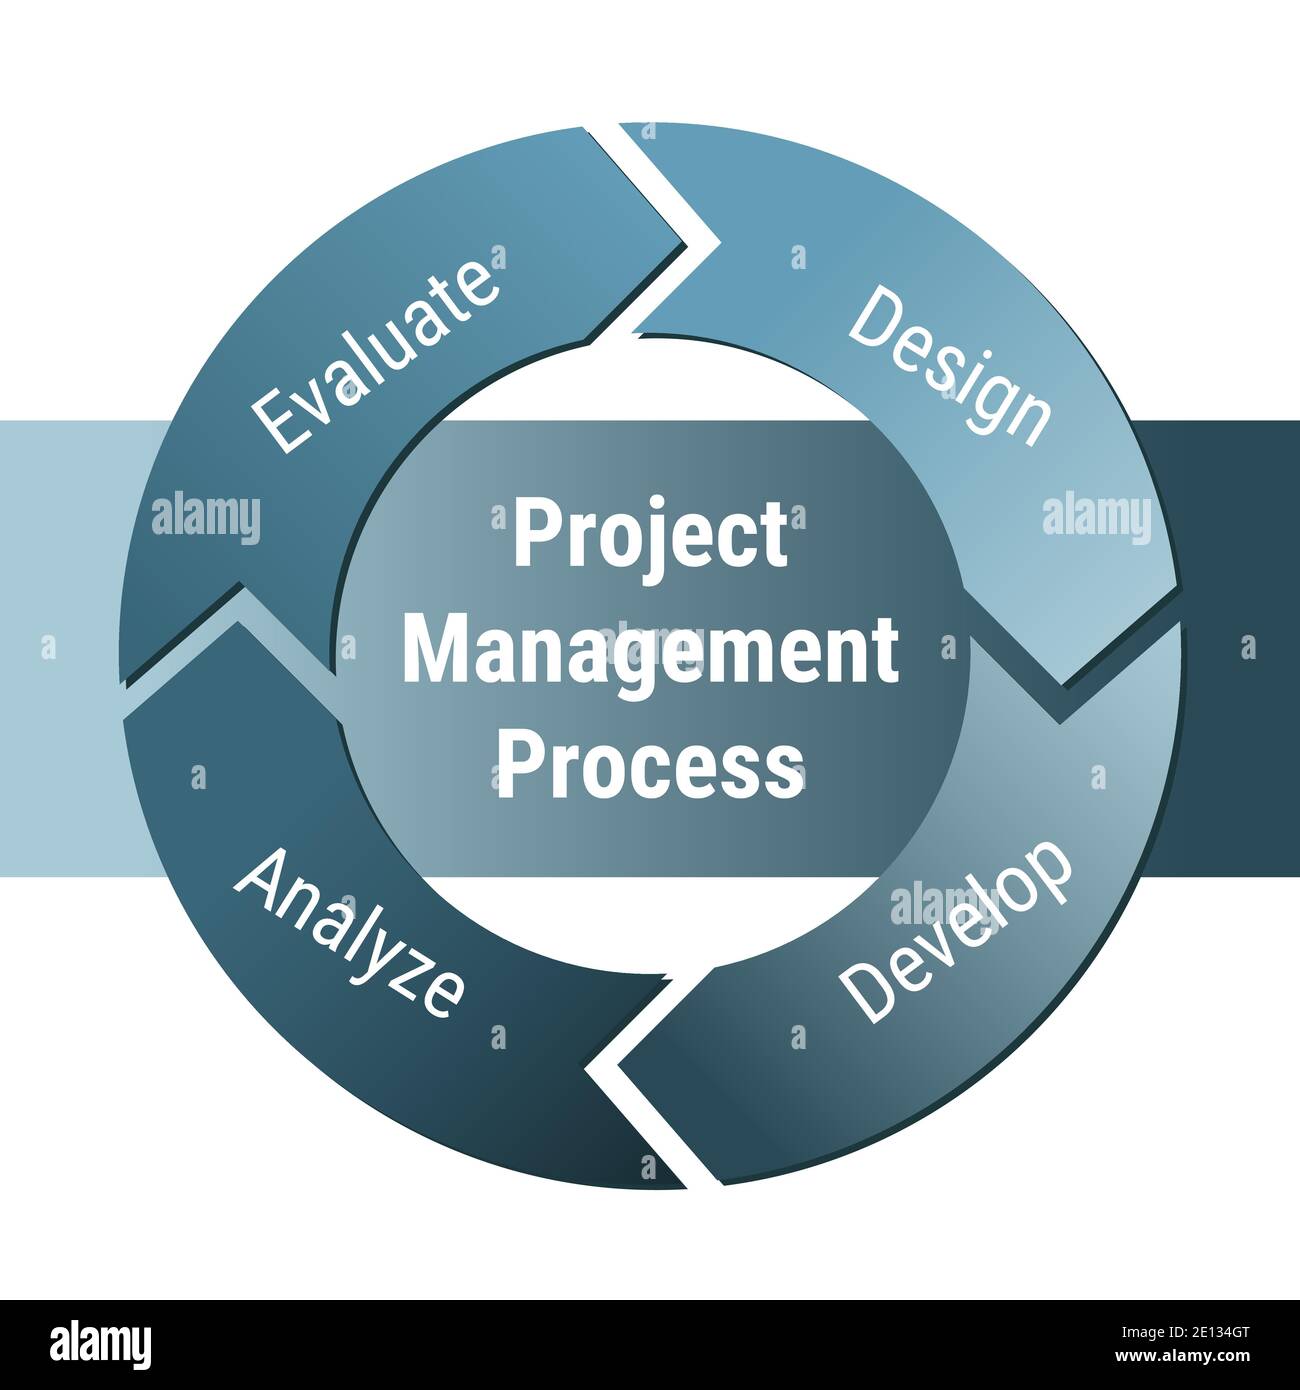 Project management process methodology. Evaluate, design, develop, analyze. Iterative workflow cycle scheme concept. Circle graphic with arrows. Blue Stock Vector